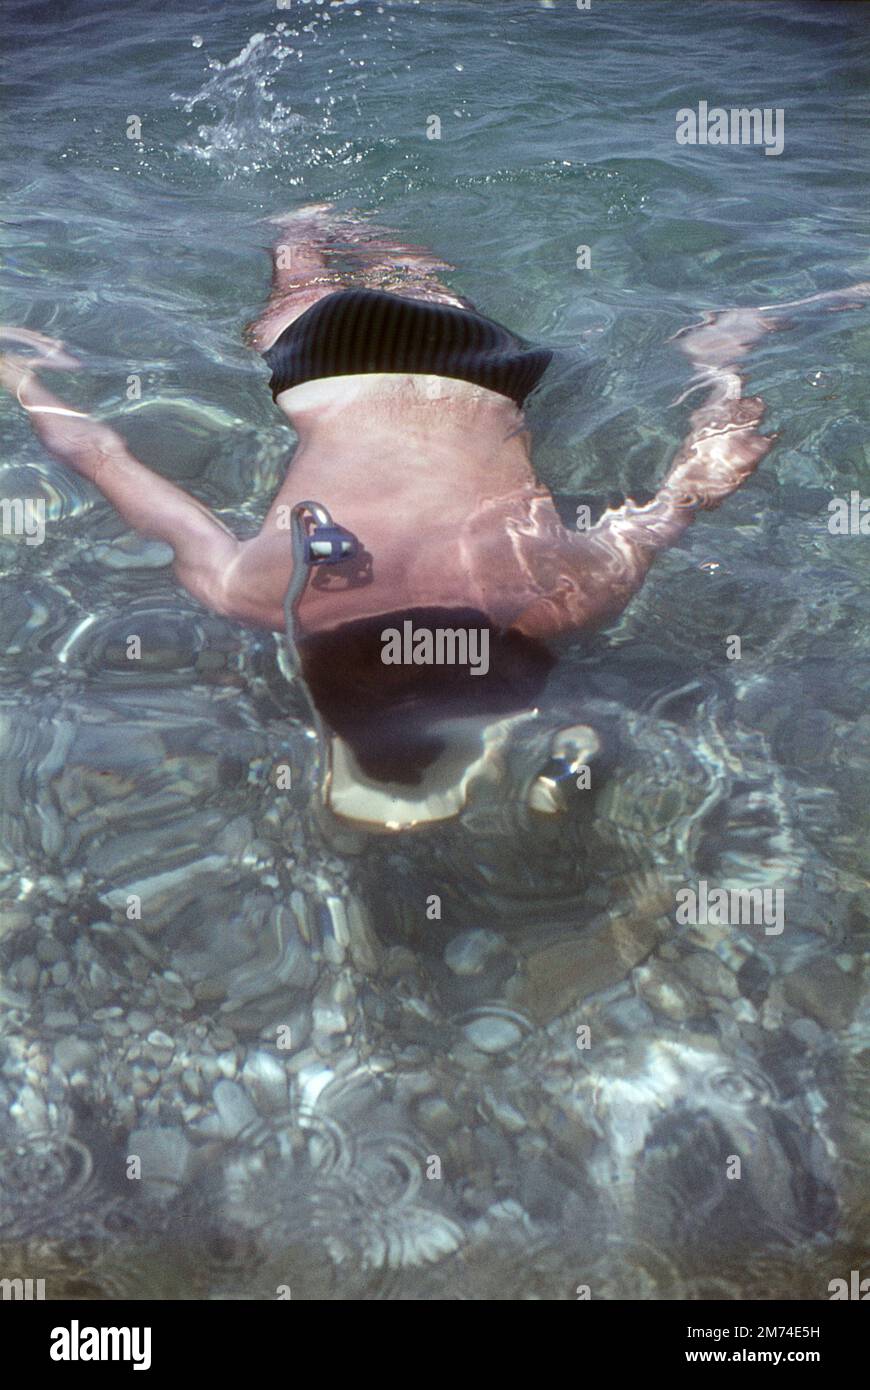 Xylokastro, Greece. August 1963. A young man snorkelling in the Gulf of Corinth at the seaside town of Xylokastro in Corinthia in the Peloponnese, Greece. Stock Photo